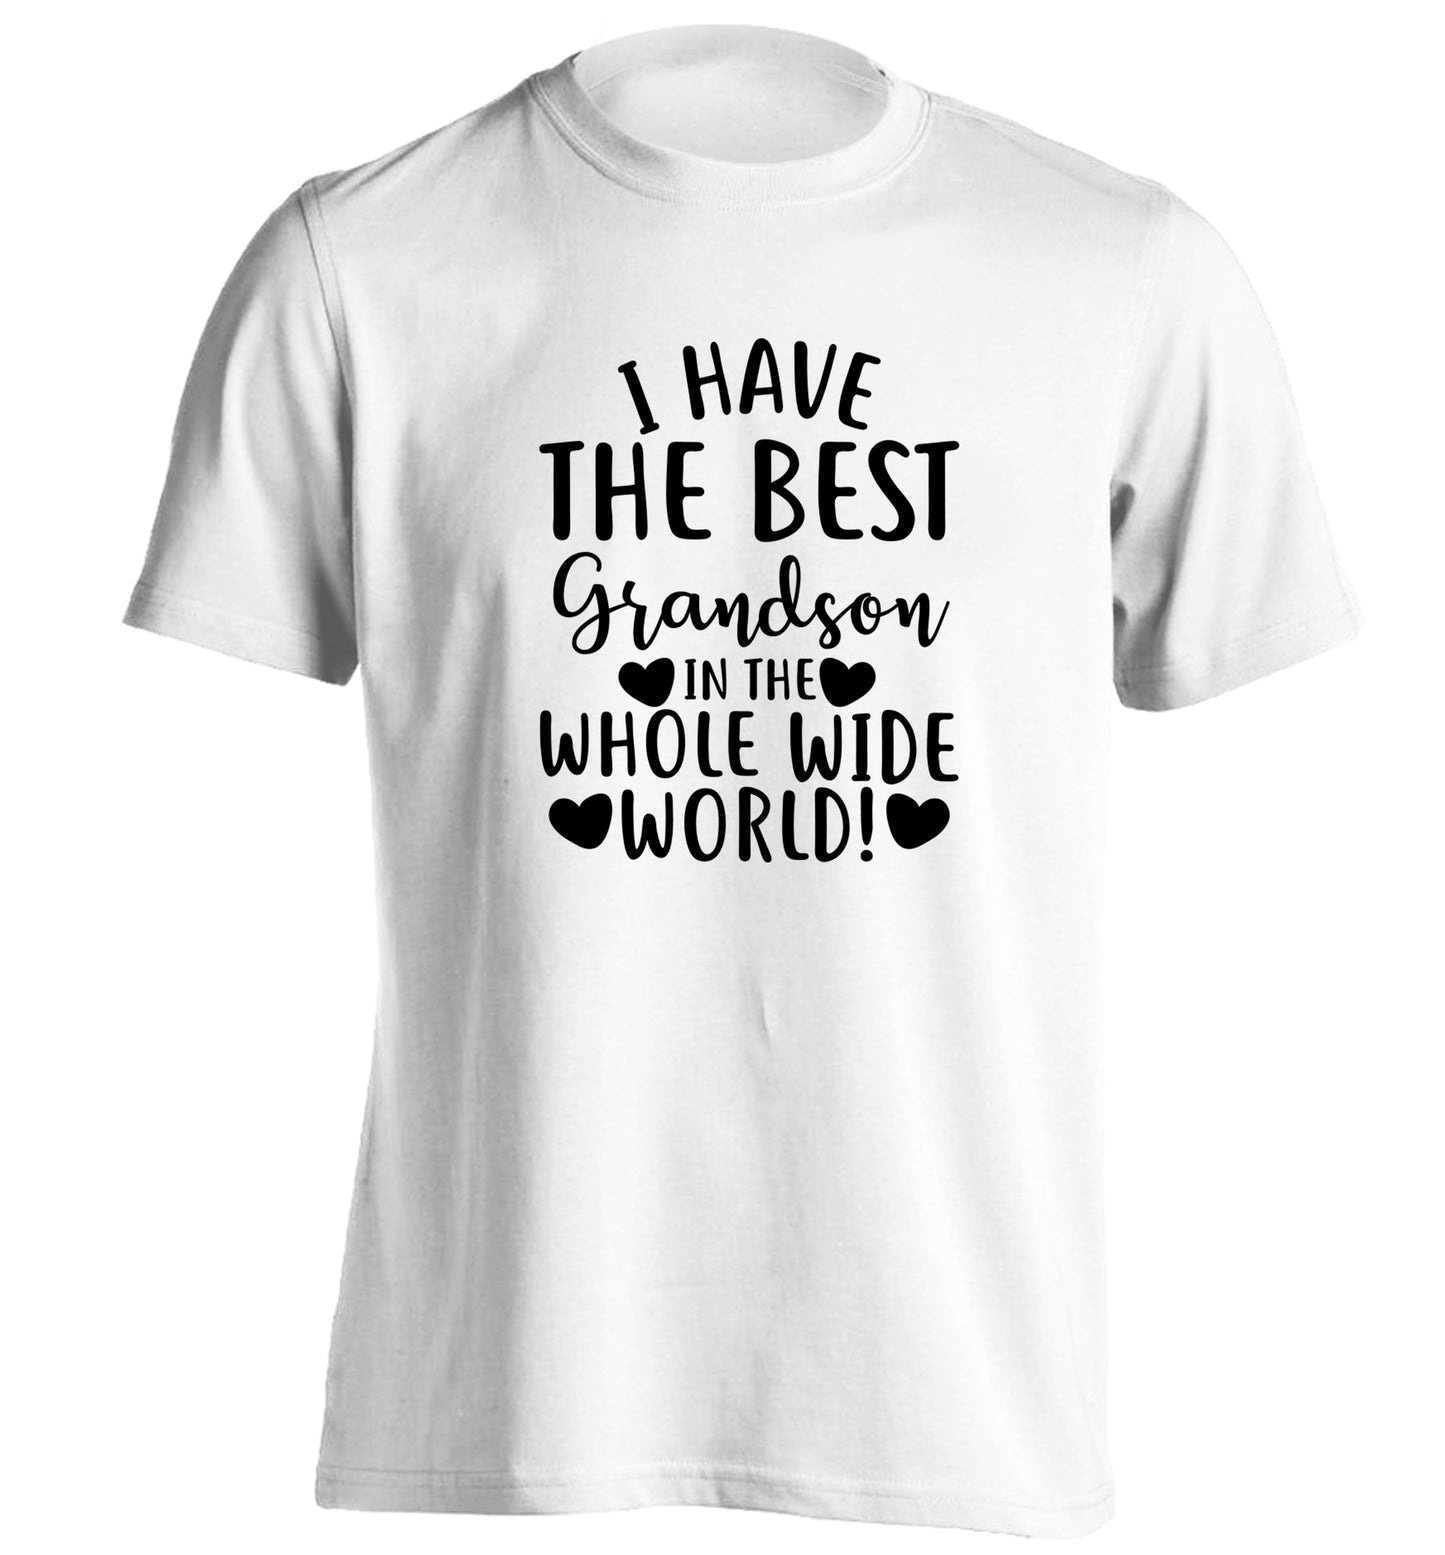 I have the best grandson in the whole wide world! adults unisex white Tshirt 2XL